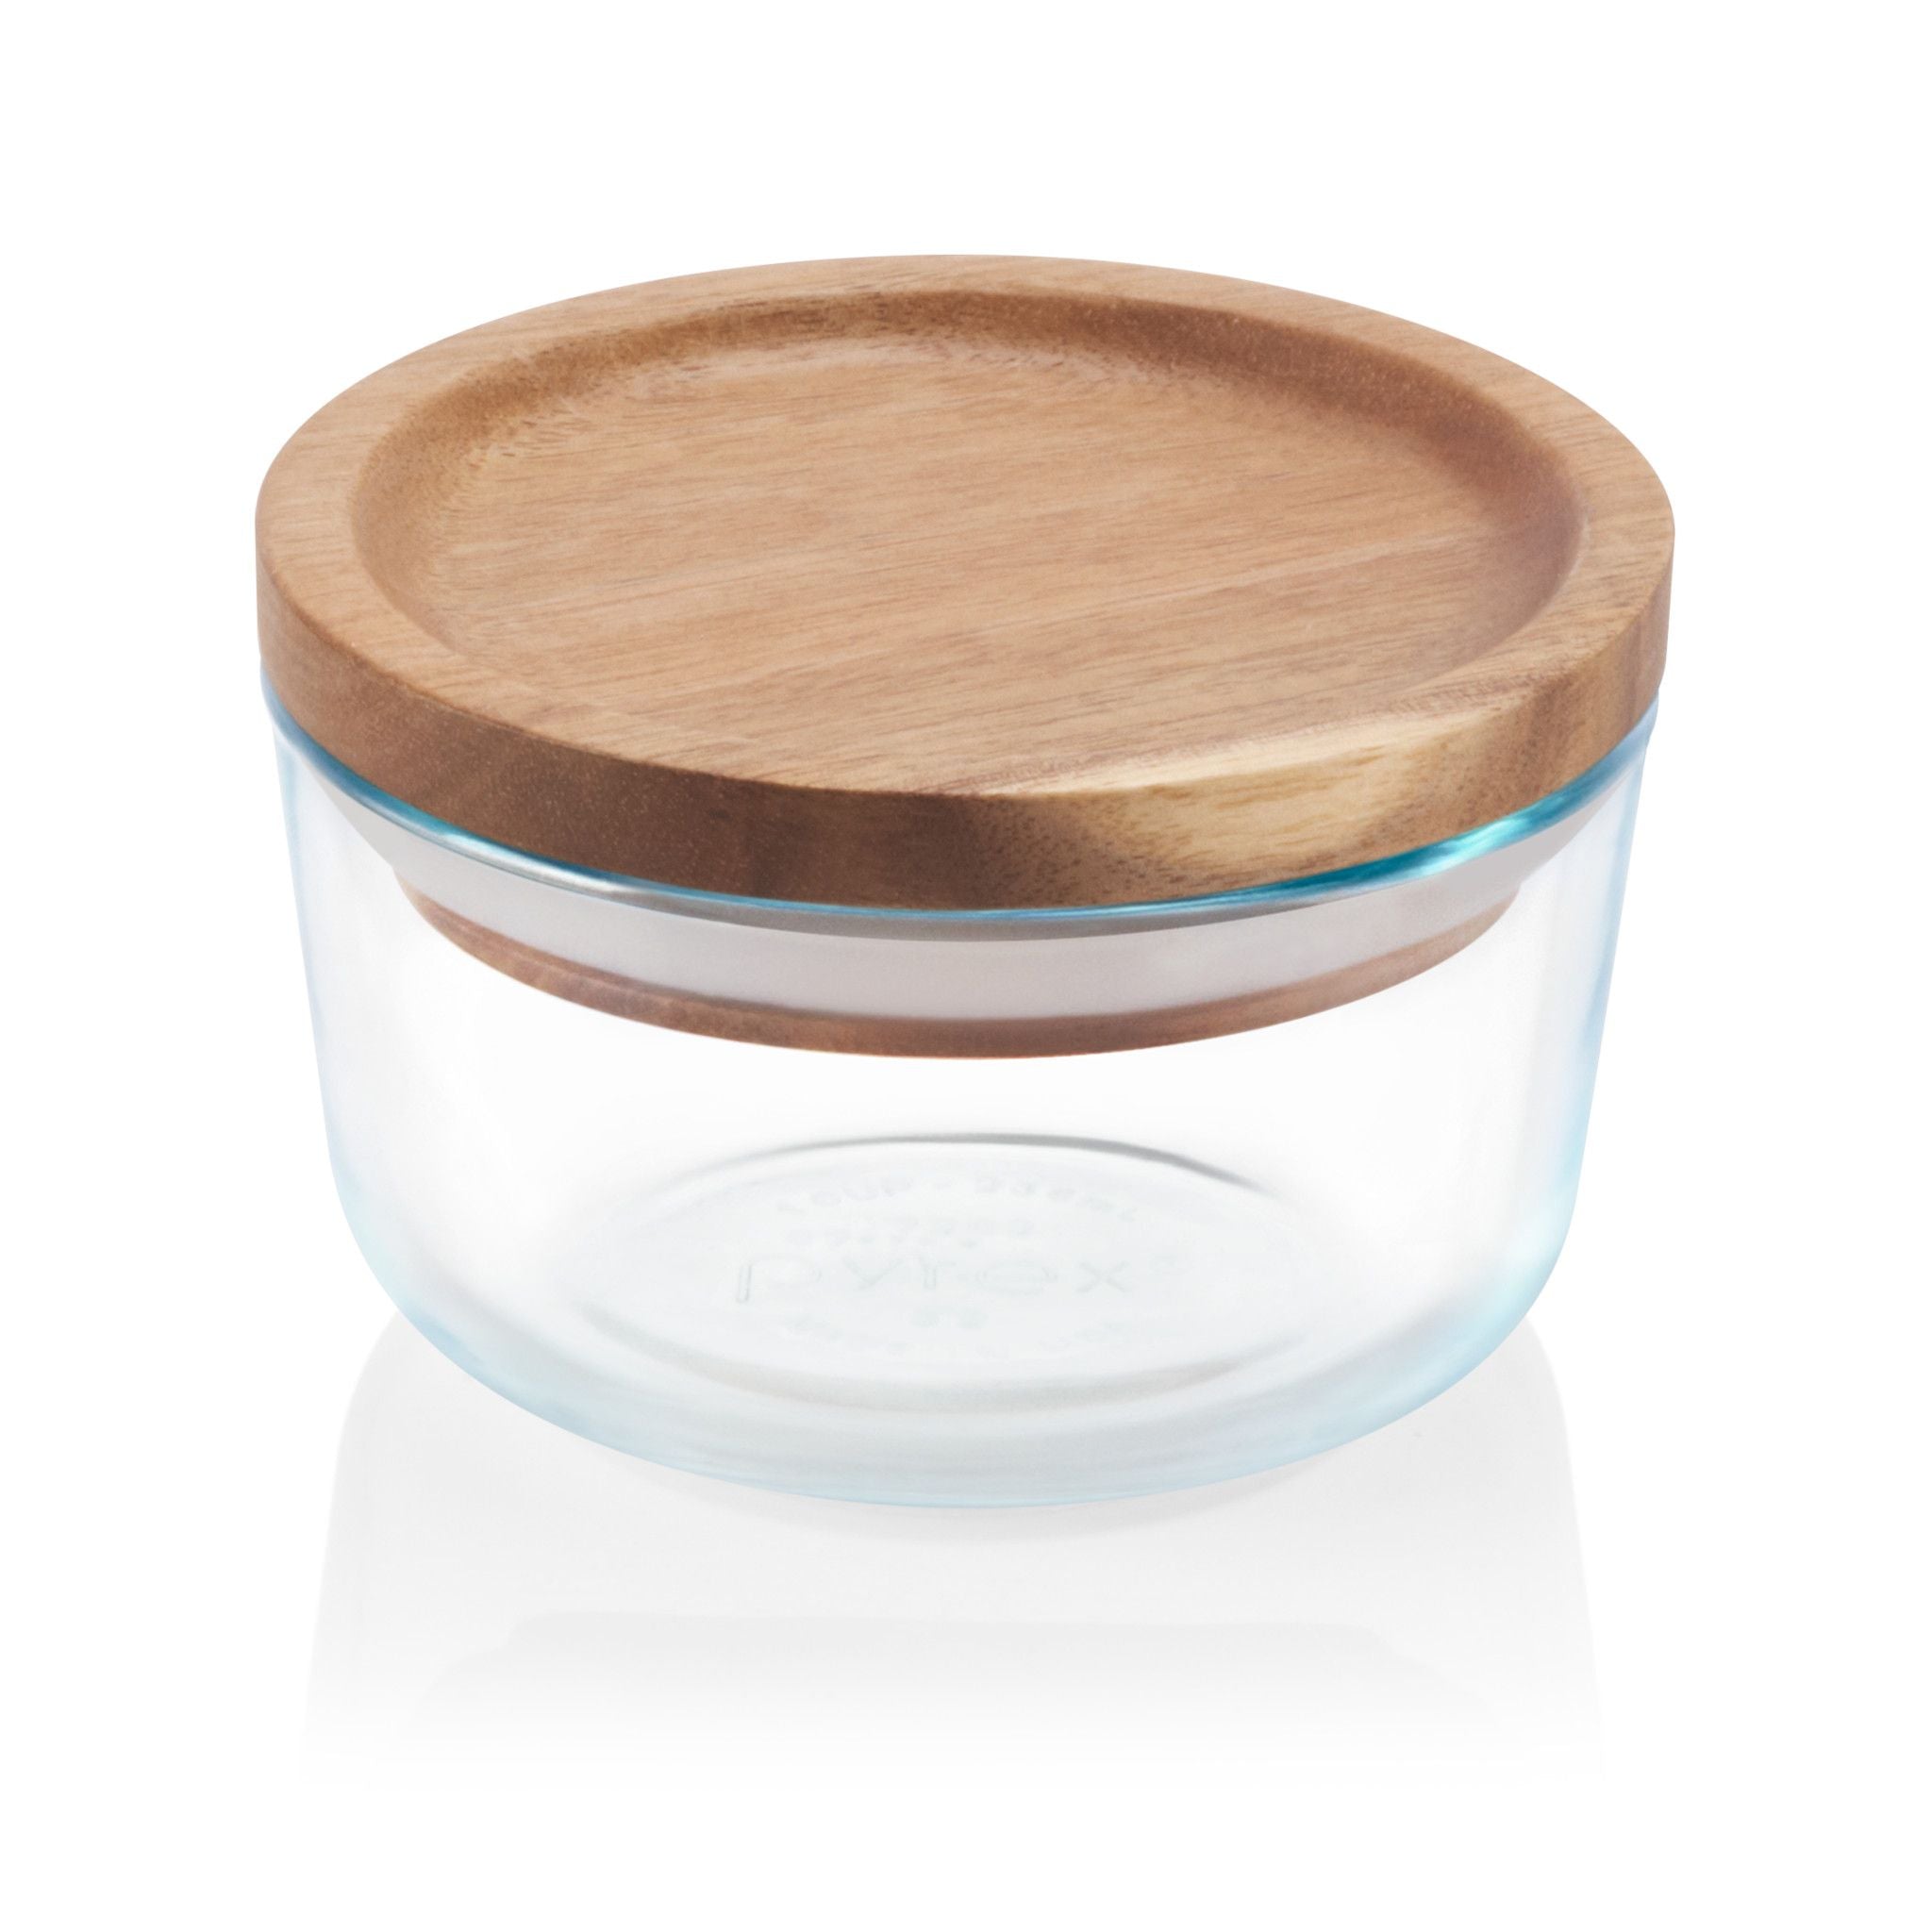 1 PYREX 2 CUP Glass Food Storage Container w/ WOODEN LID & SEAL Dry Go –  Tarlton Place